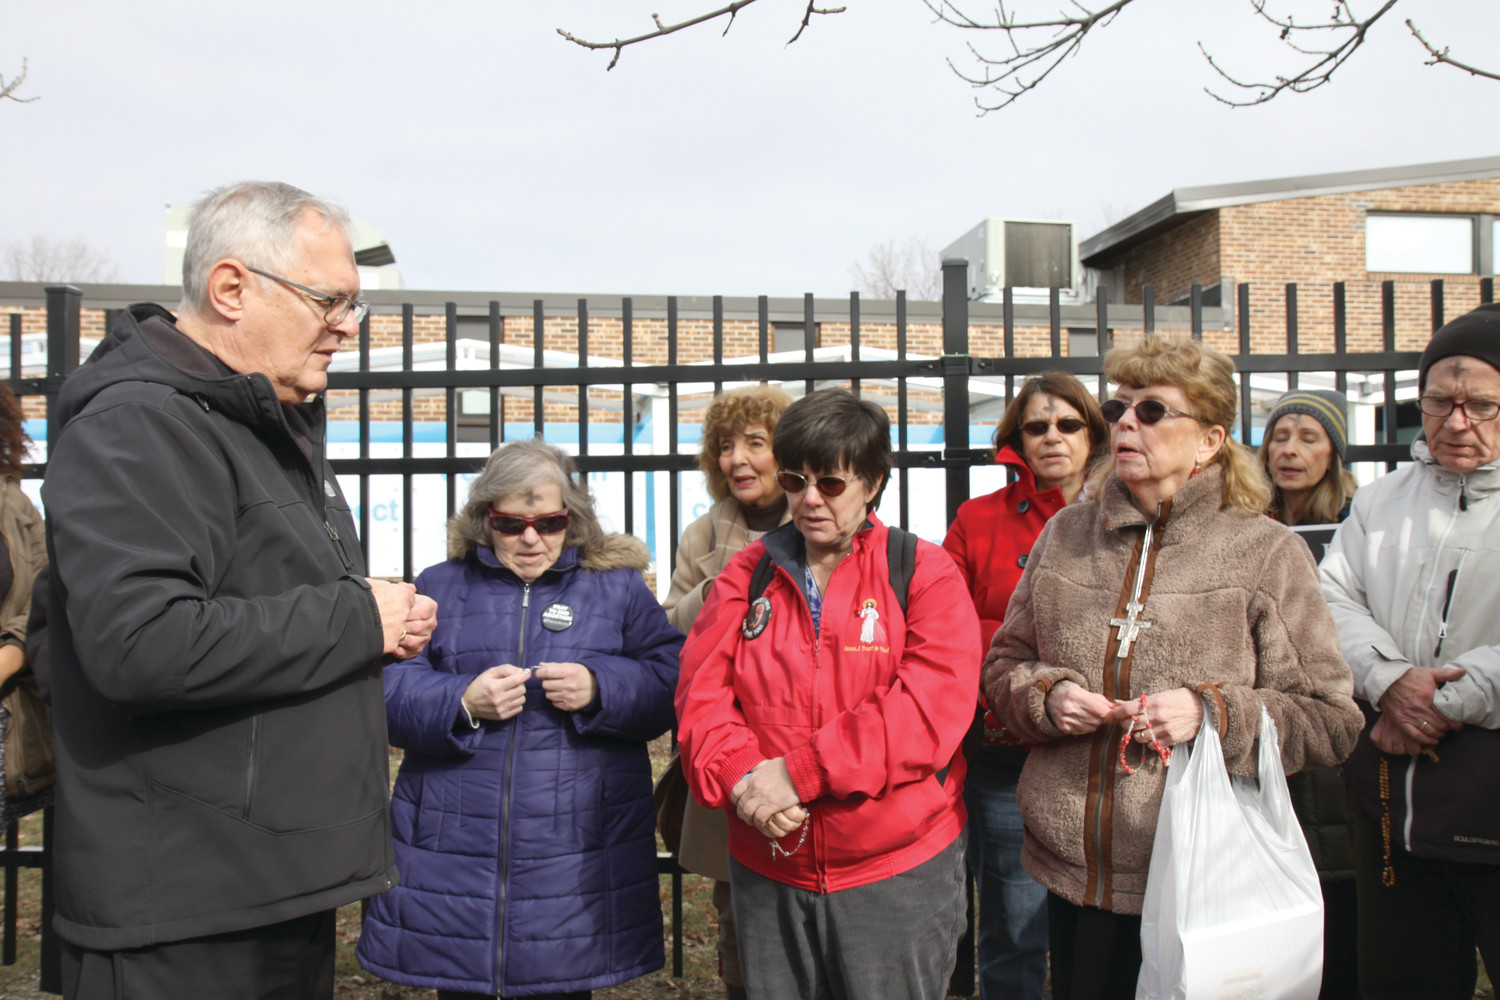 Bishop Thomas J. Tobin prayed the rosary with other pro-life advocates outside the Providence Planned Parenthood clinic following a procession from the Cathedral of Saints Peter and Paul.